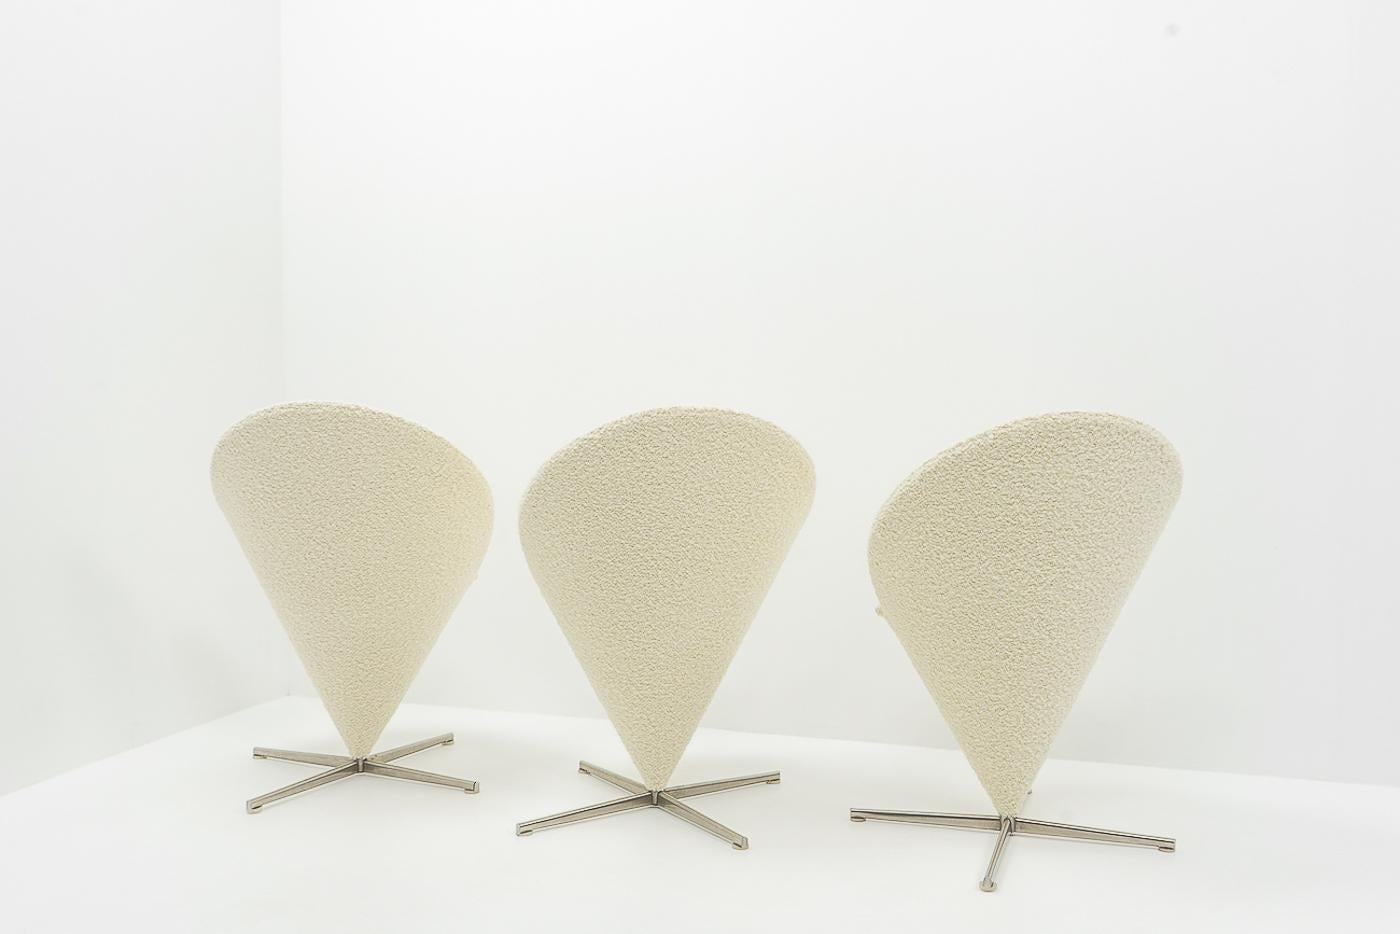 Design Classic Verner Panton Cone Chairs, Vitra, 2000s In Good Condition For Sale In Renens, CH